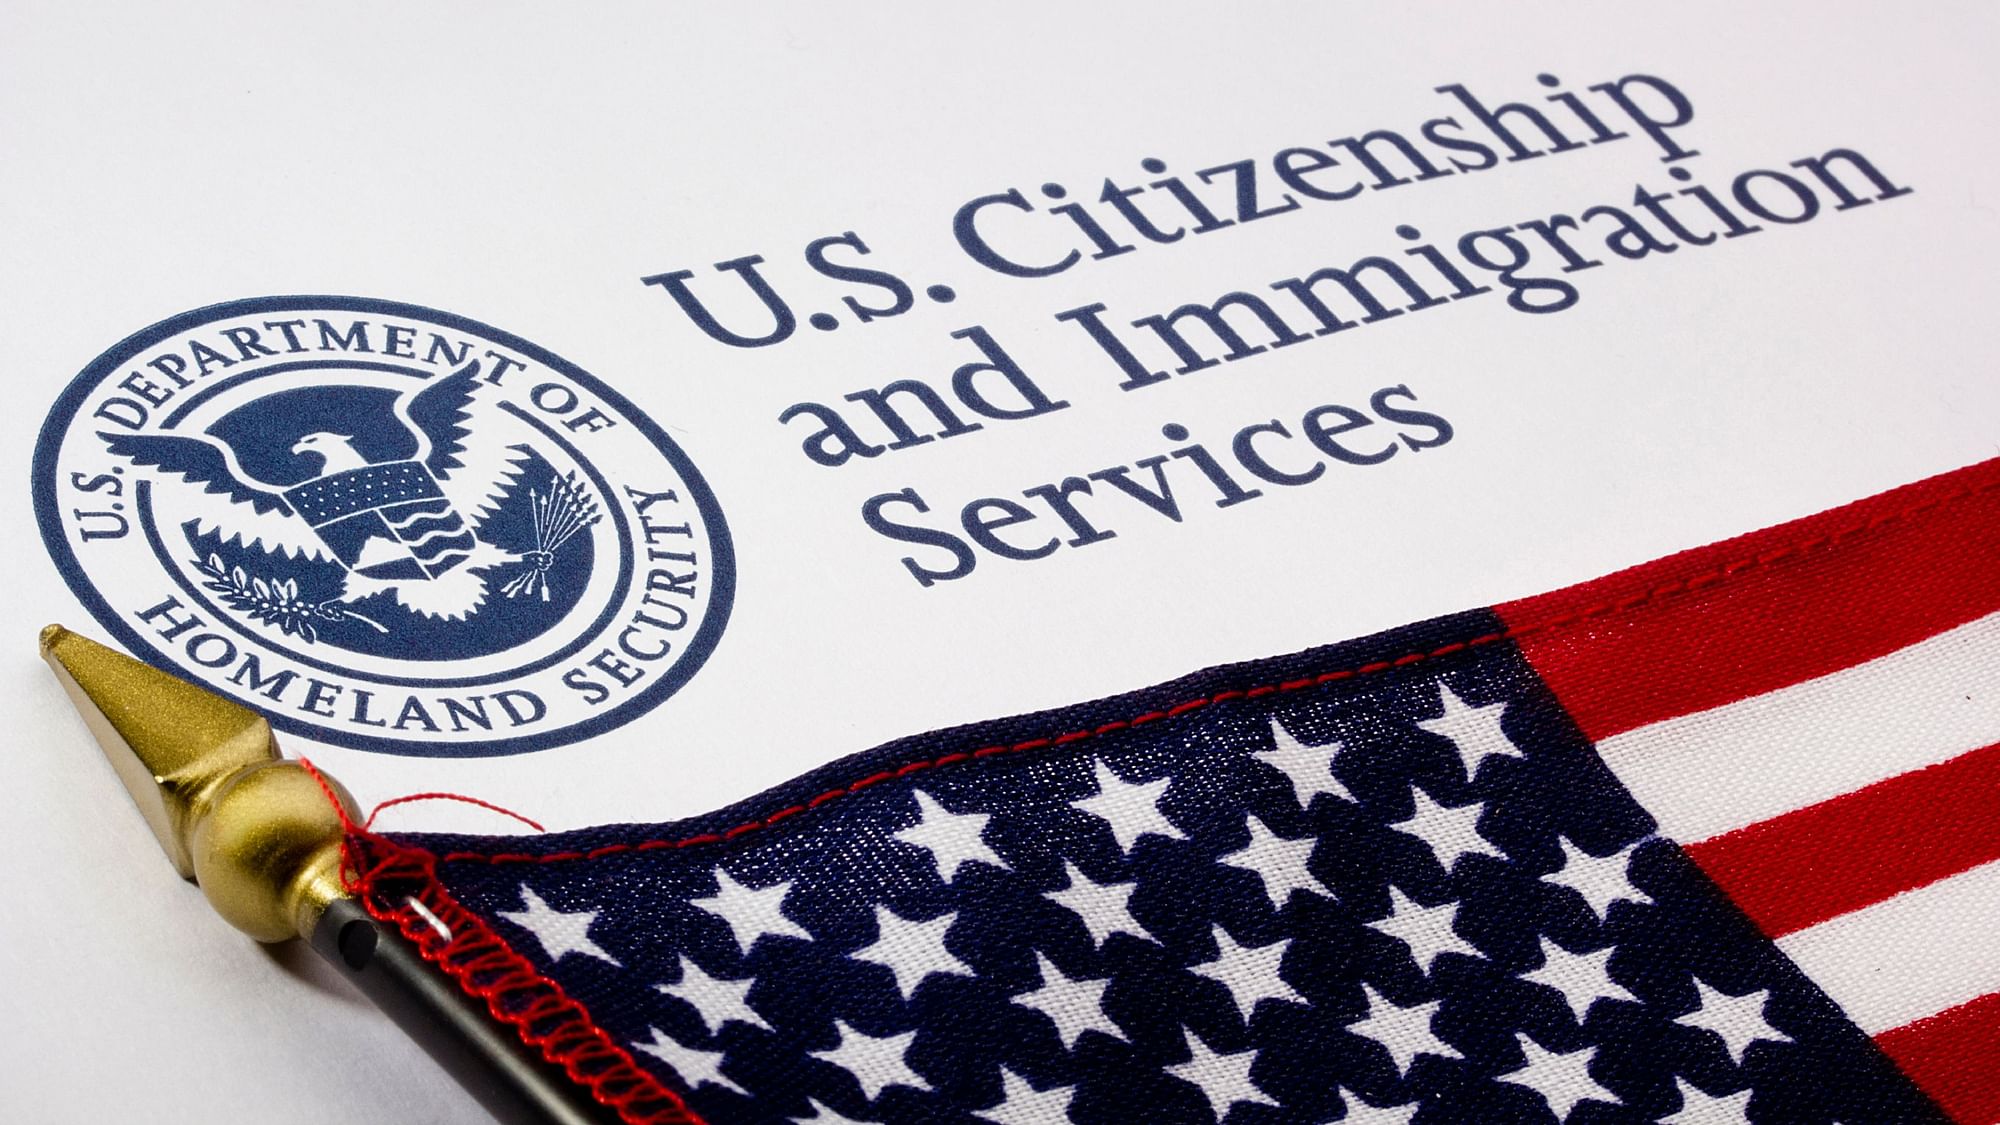 H-1B visa programme has been under scrutiny and revision by the Trump administration. 